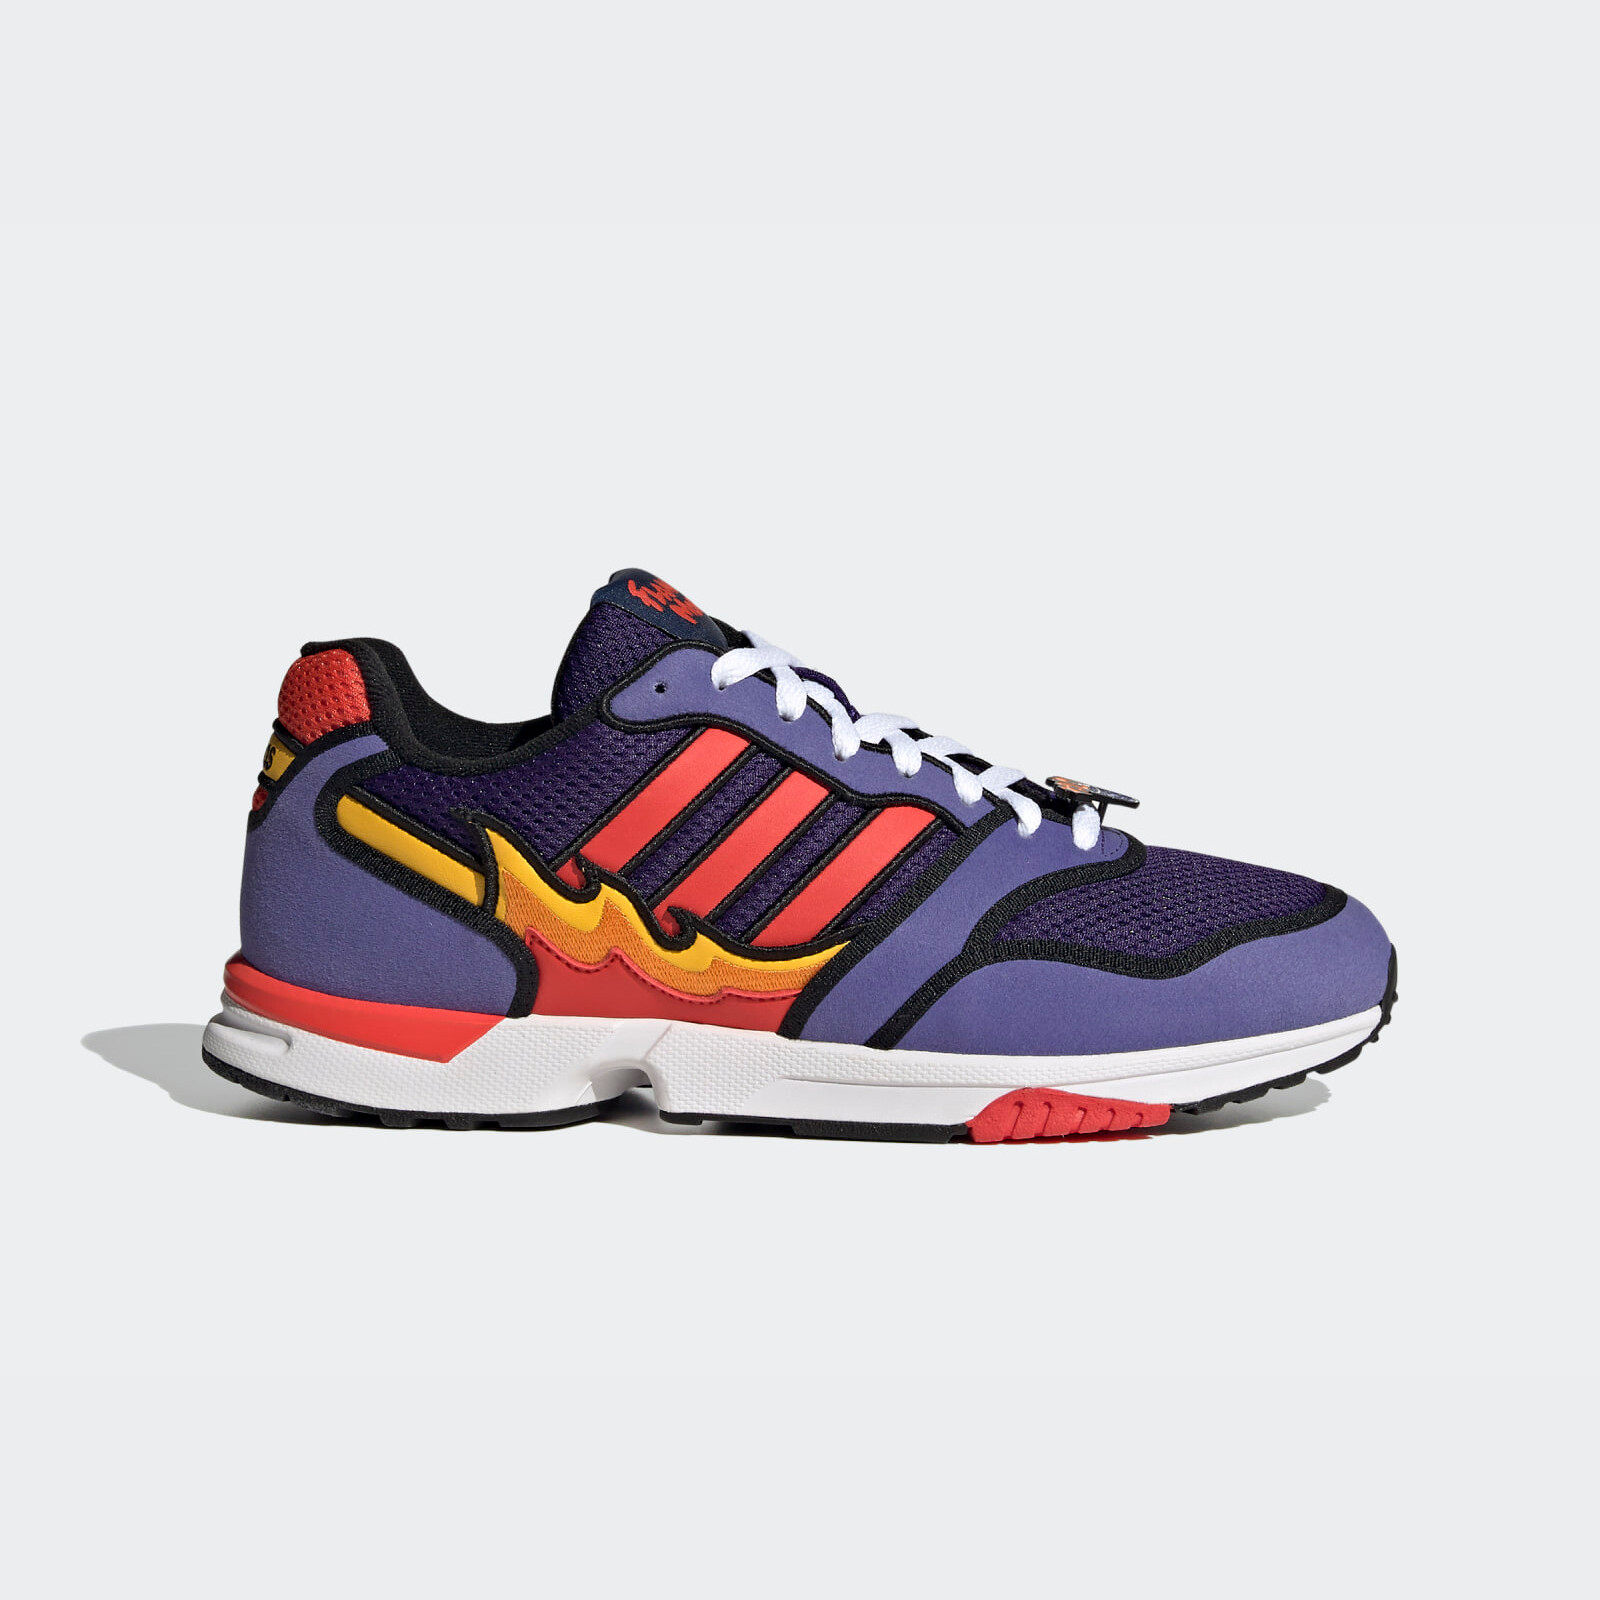 The Simpsons x Adidas
ZX 1000
« Flaming Moe’s »